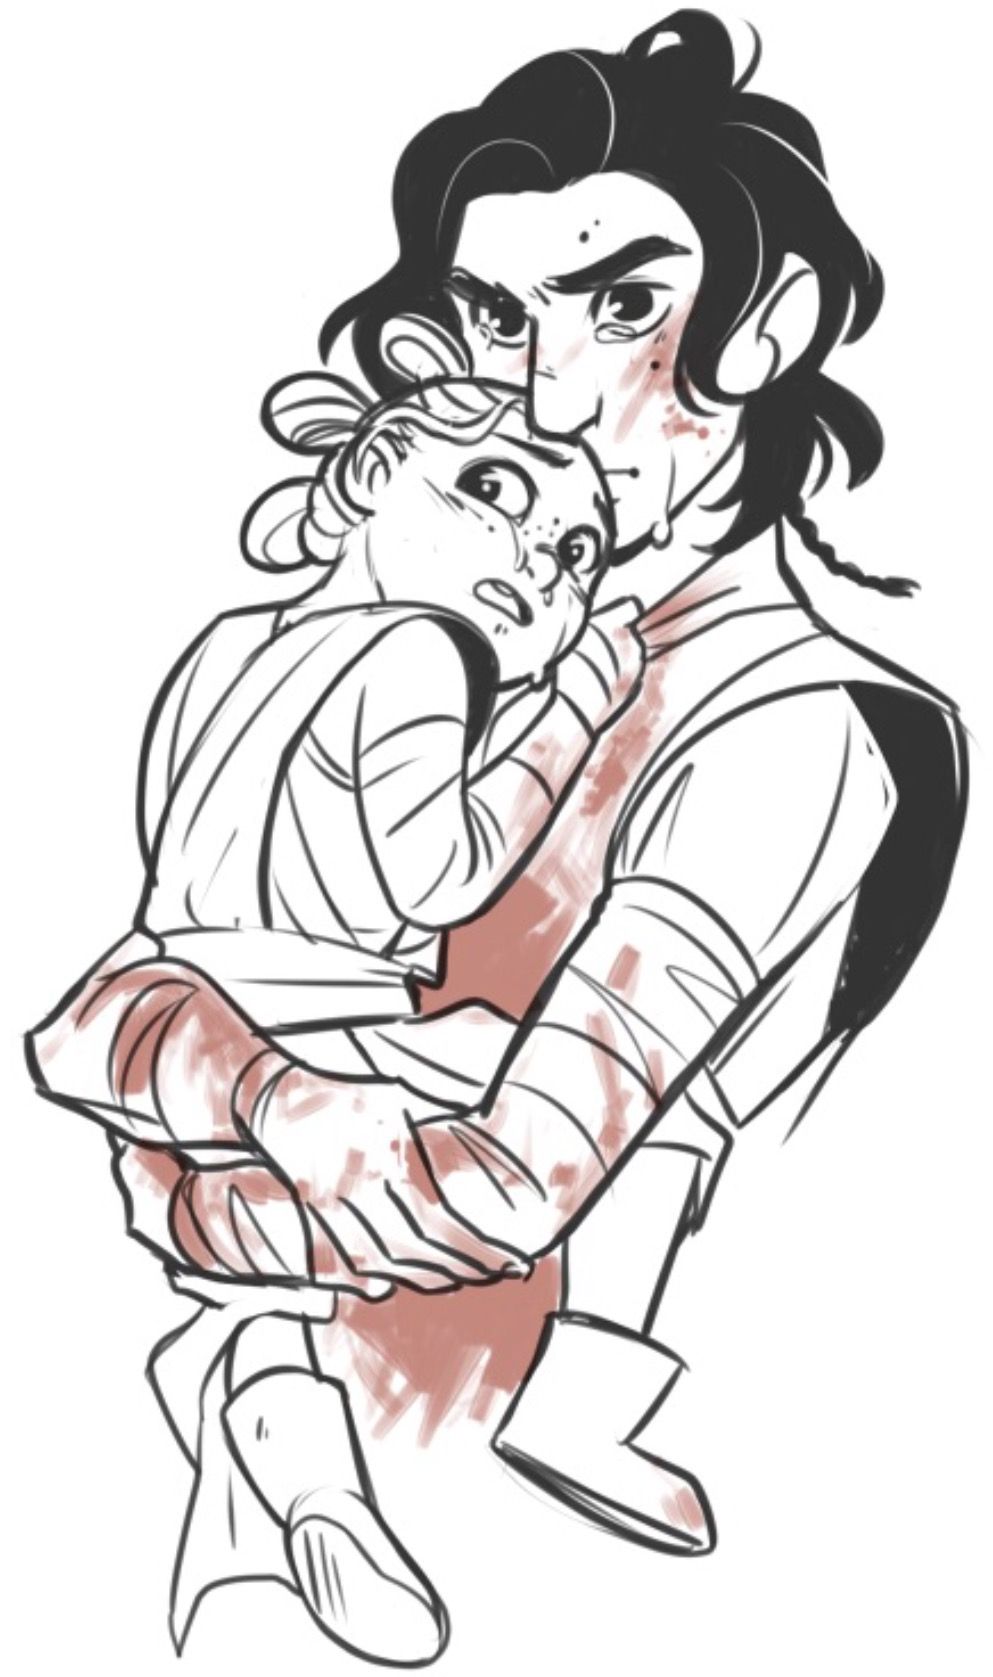 Theres Just Something So Sweet About This Young Kylo And Little Rey Star Wars